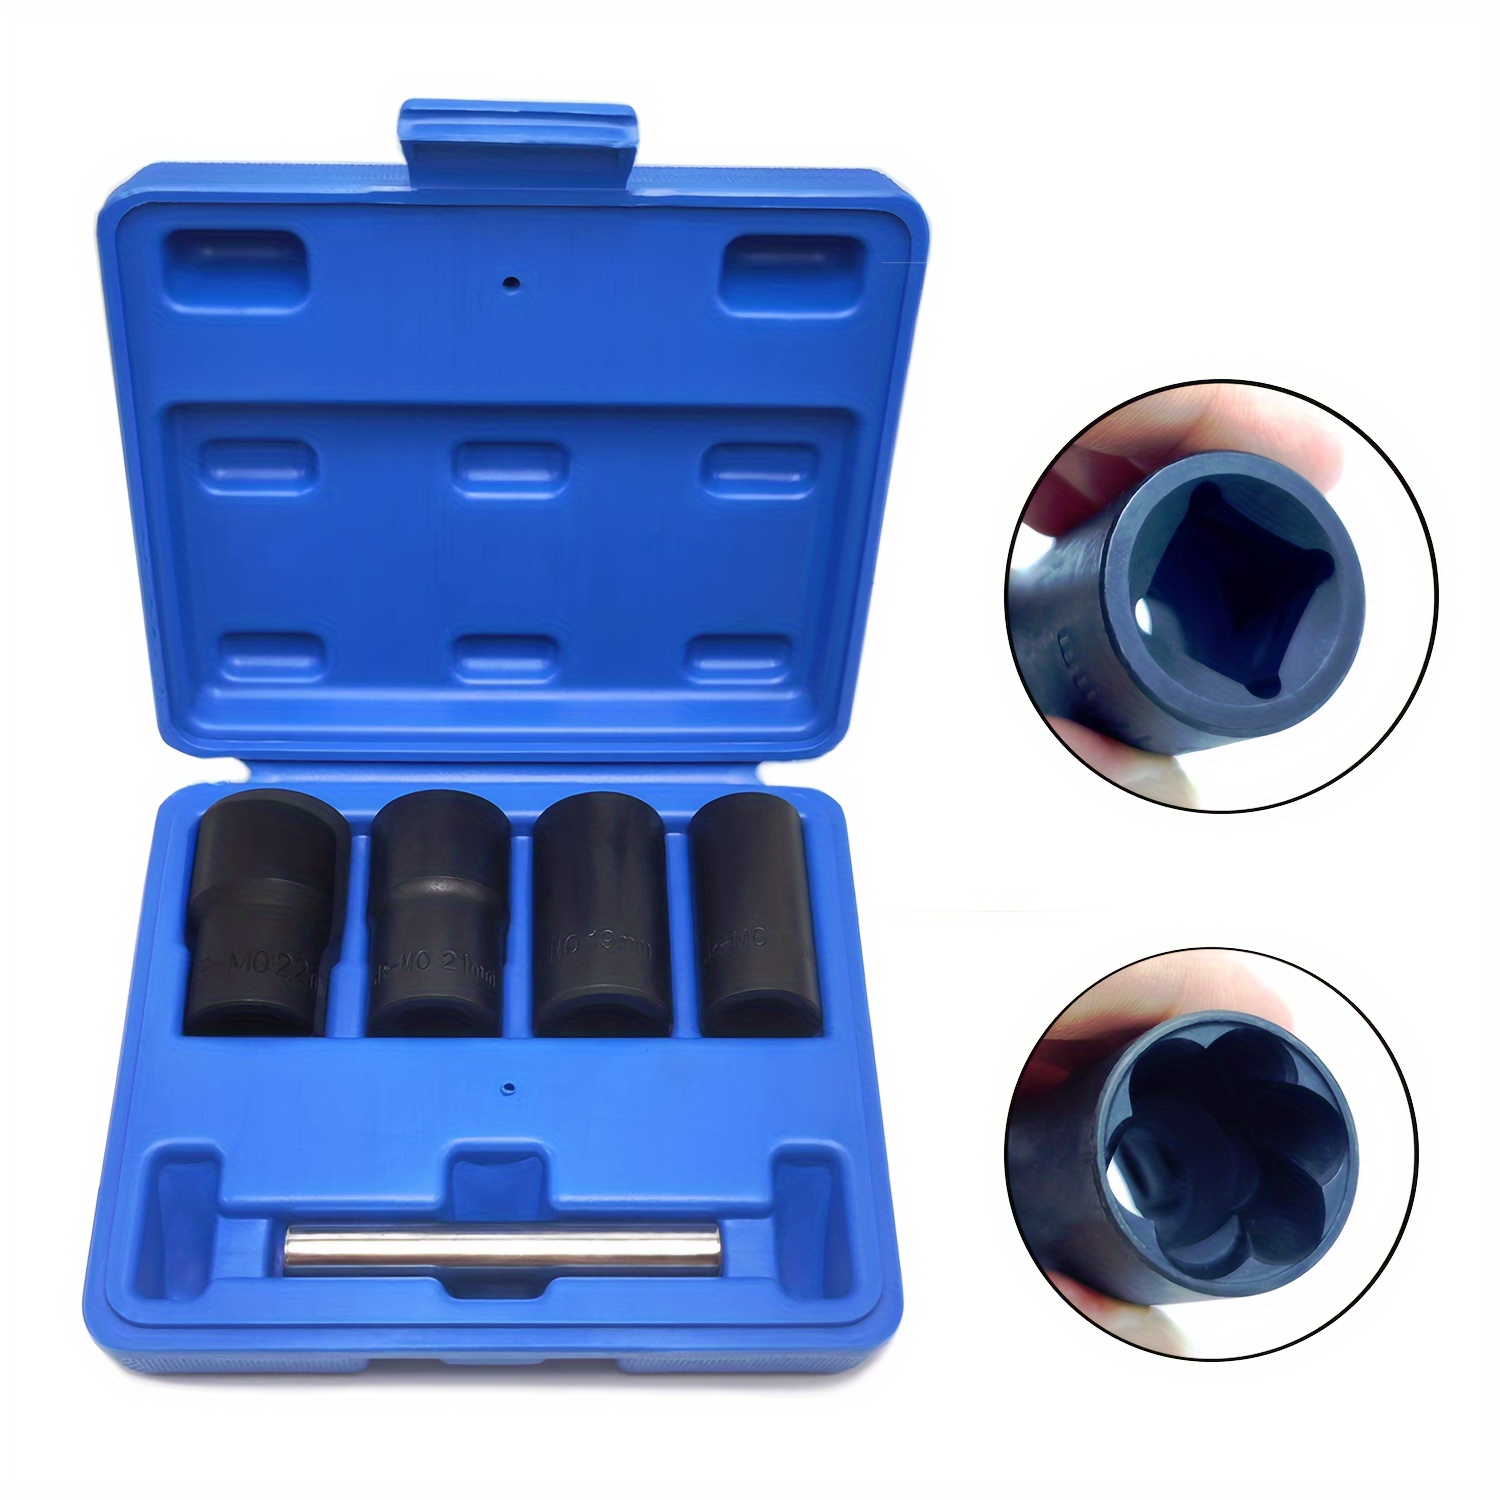 

5pcs Twist Lug Nut Socket Set - 1/2 Inch Drive Damaged Nut Lock Remover Extractor - Rusted & Strip & Stripped & Stuck Locking Nut Removal Tool Kit With 17mm 19mm 21mm 22mm Sockets